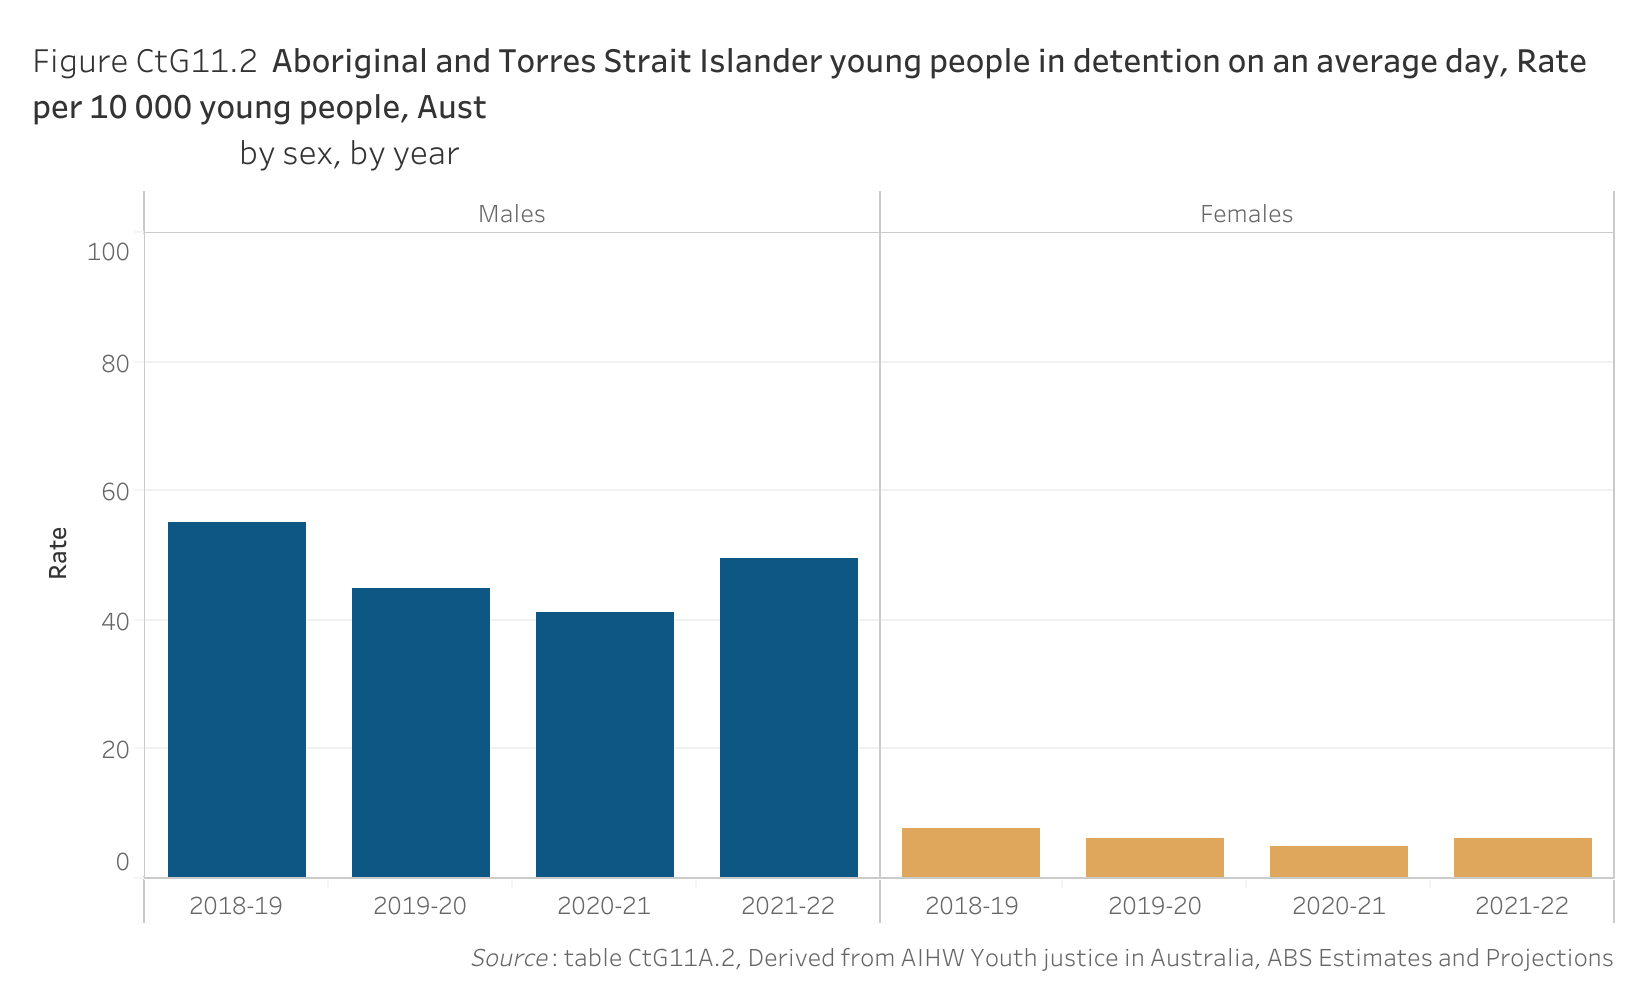 Figure CtG11.2 shows Aboriginal and Torres Strait Islander young people in detention on an average day, Rate per 10 000 young people, Australia, by sex, by year. More details can be found within the text near this image.